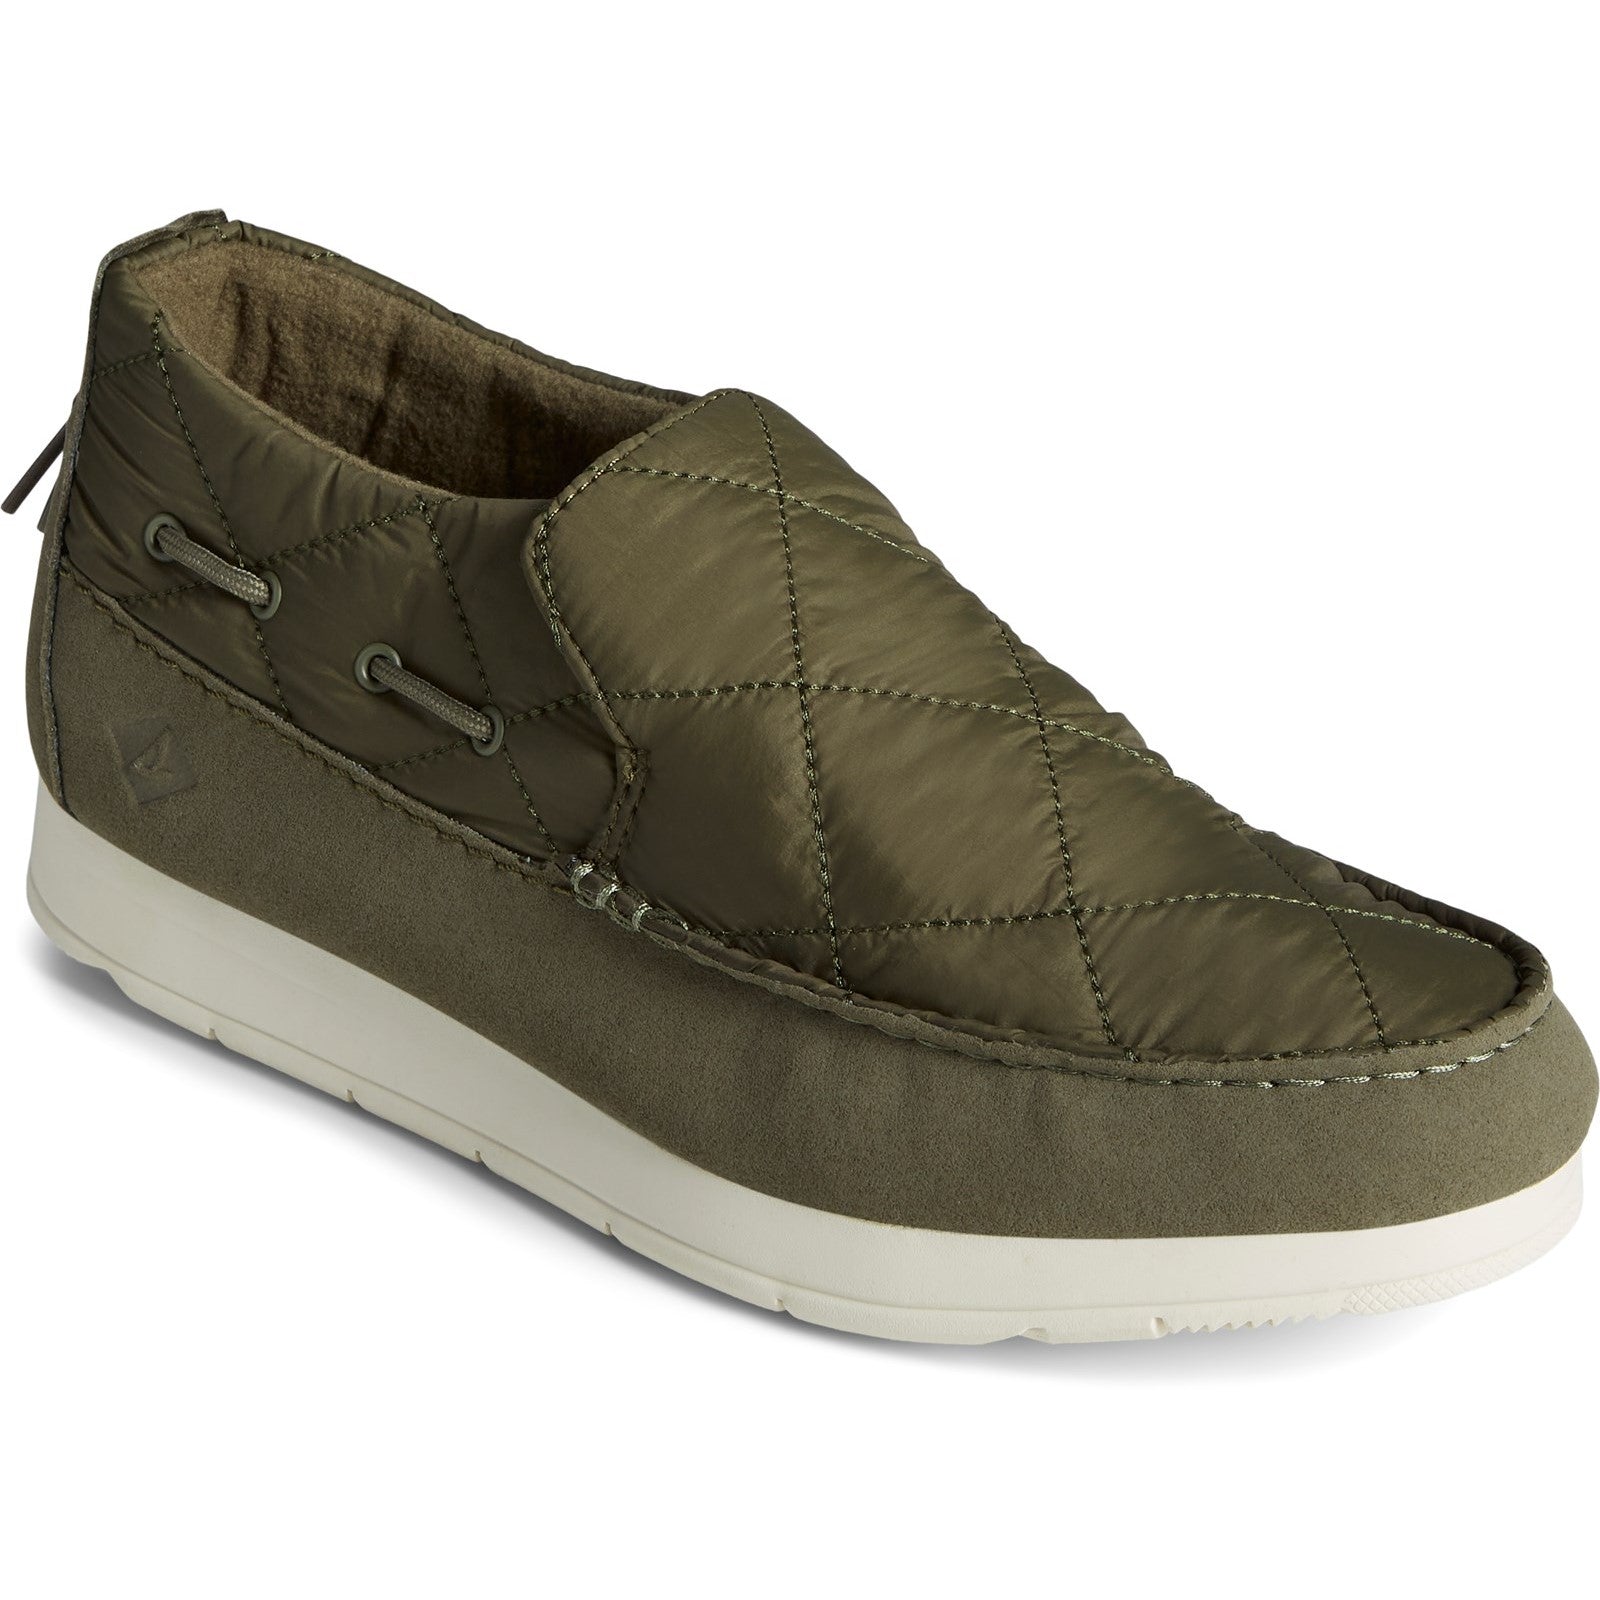 Sperry Mens Moc Sider Slip On Trainers - Olive